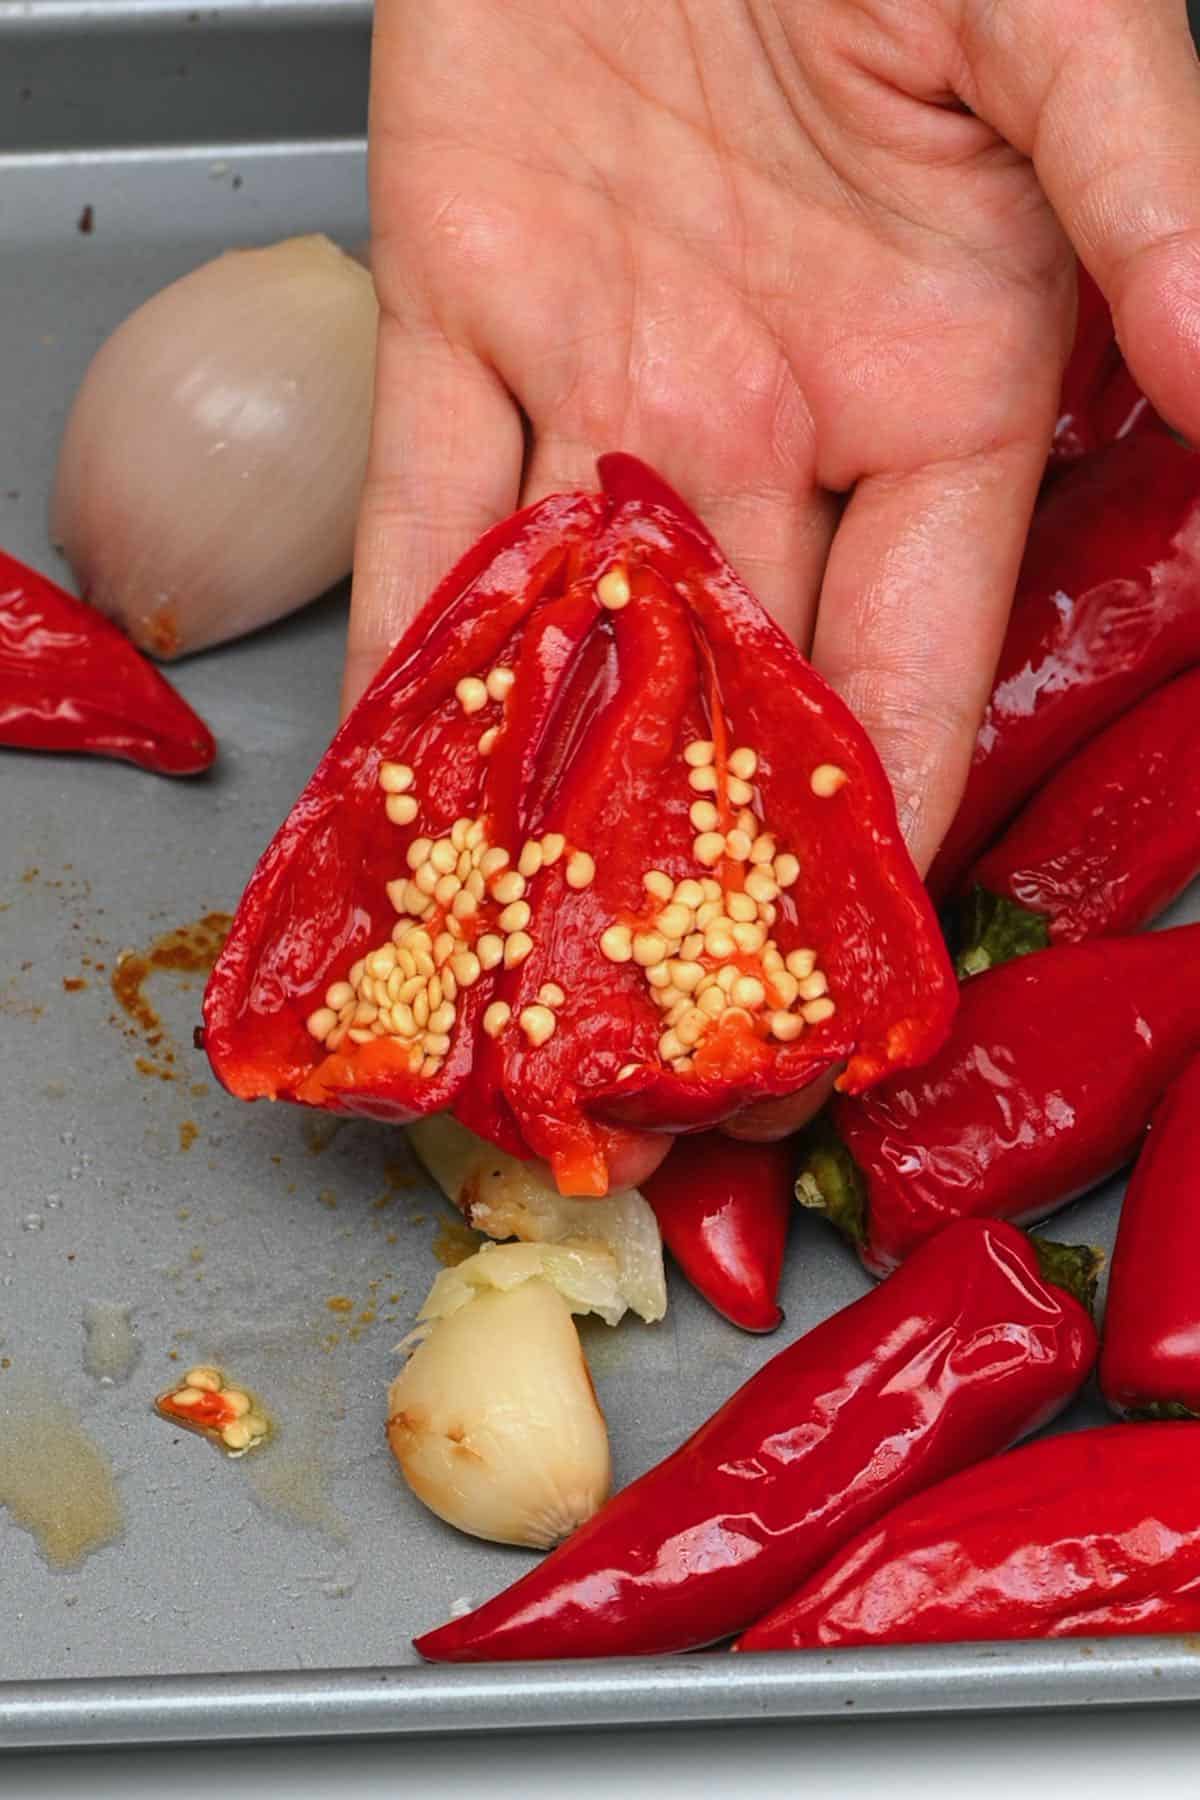 Rose Harissa - How to Make this Smoky, Spicy Condiment - OMG! Yummy